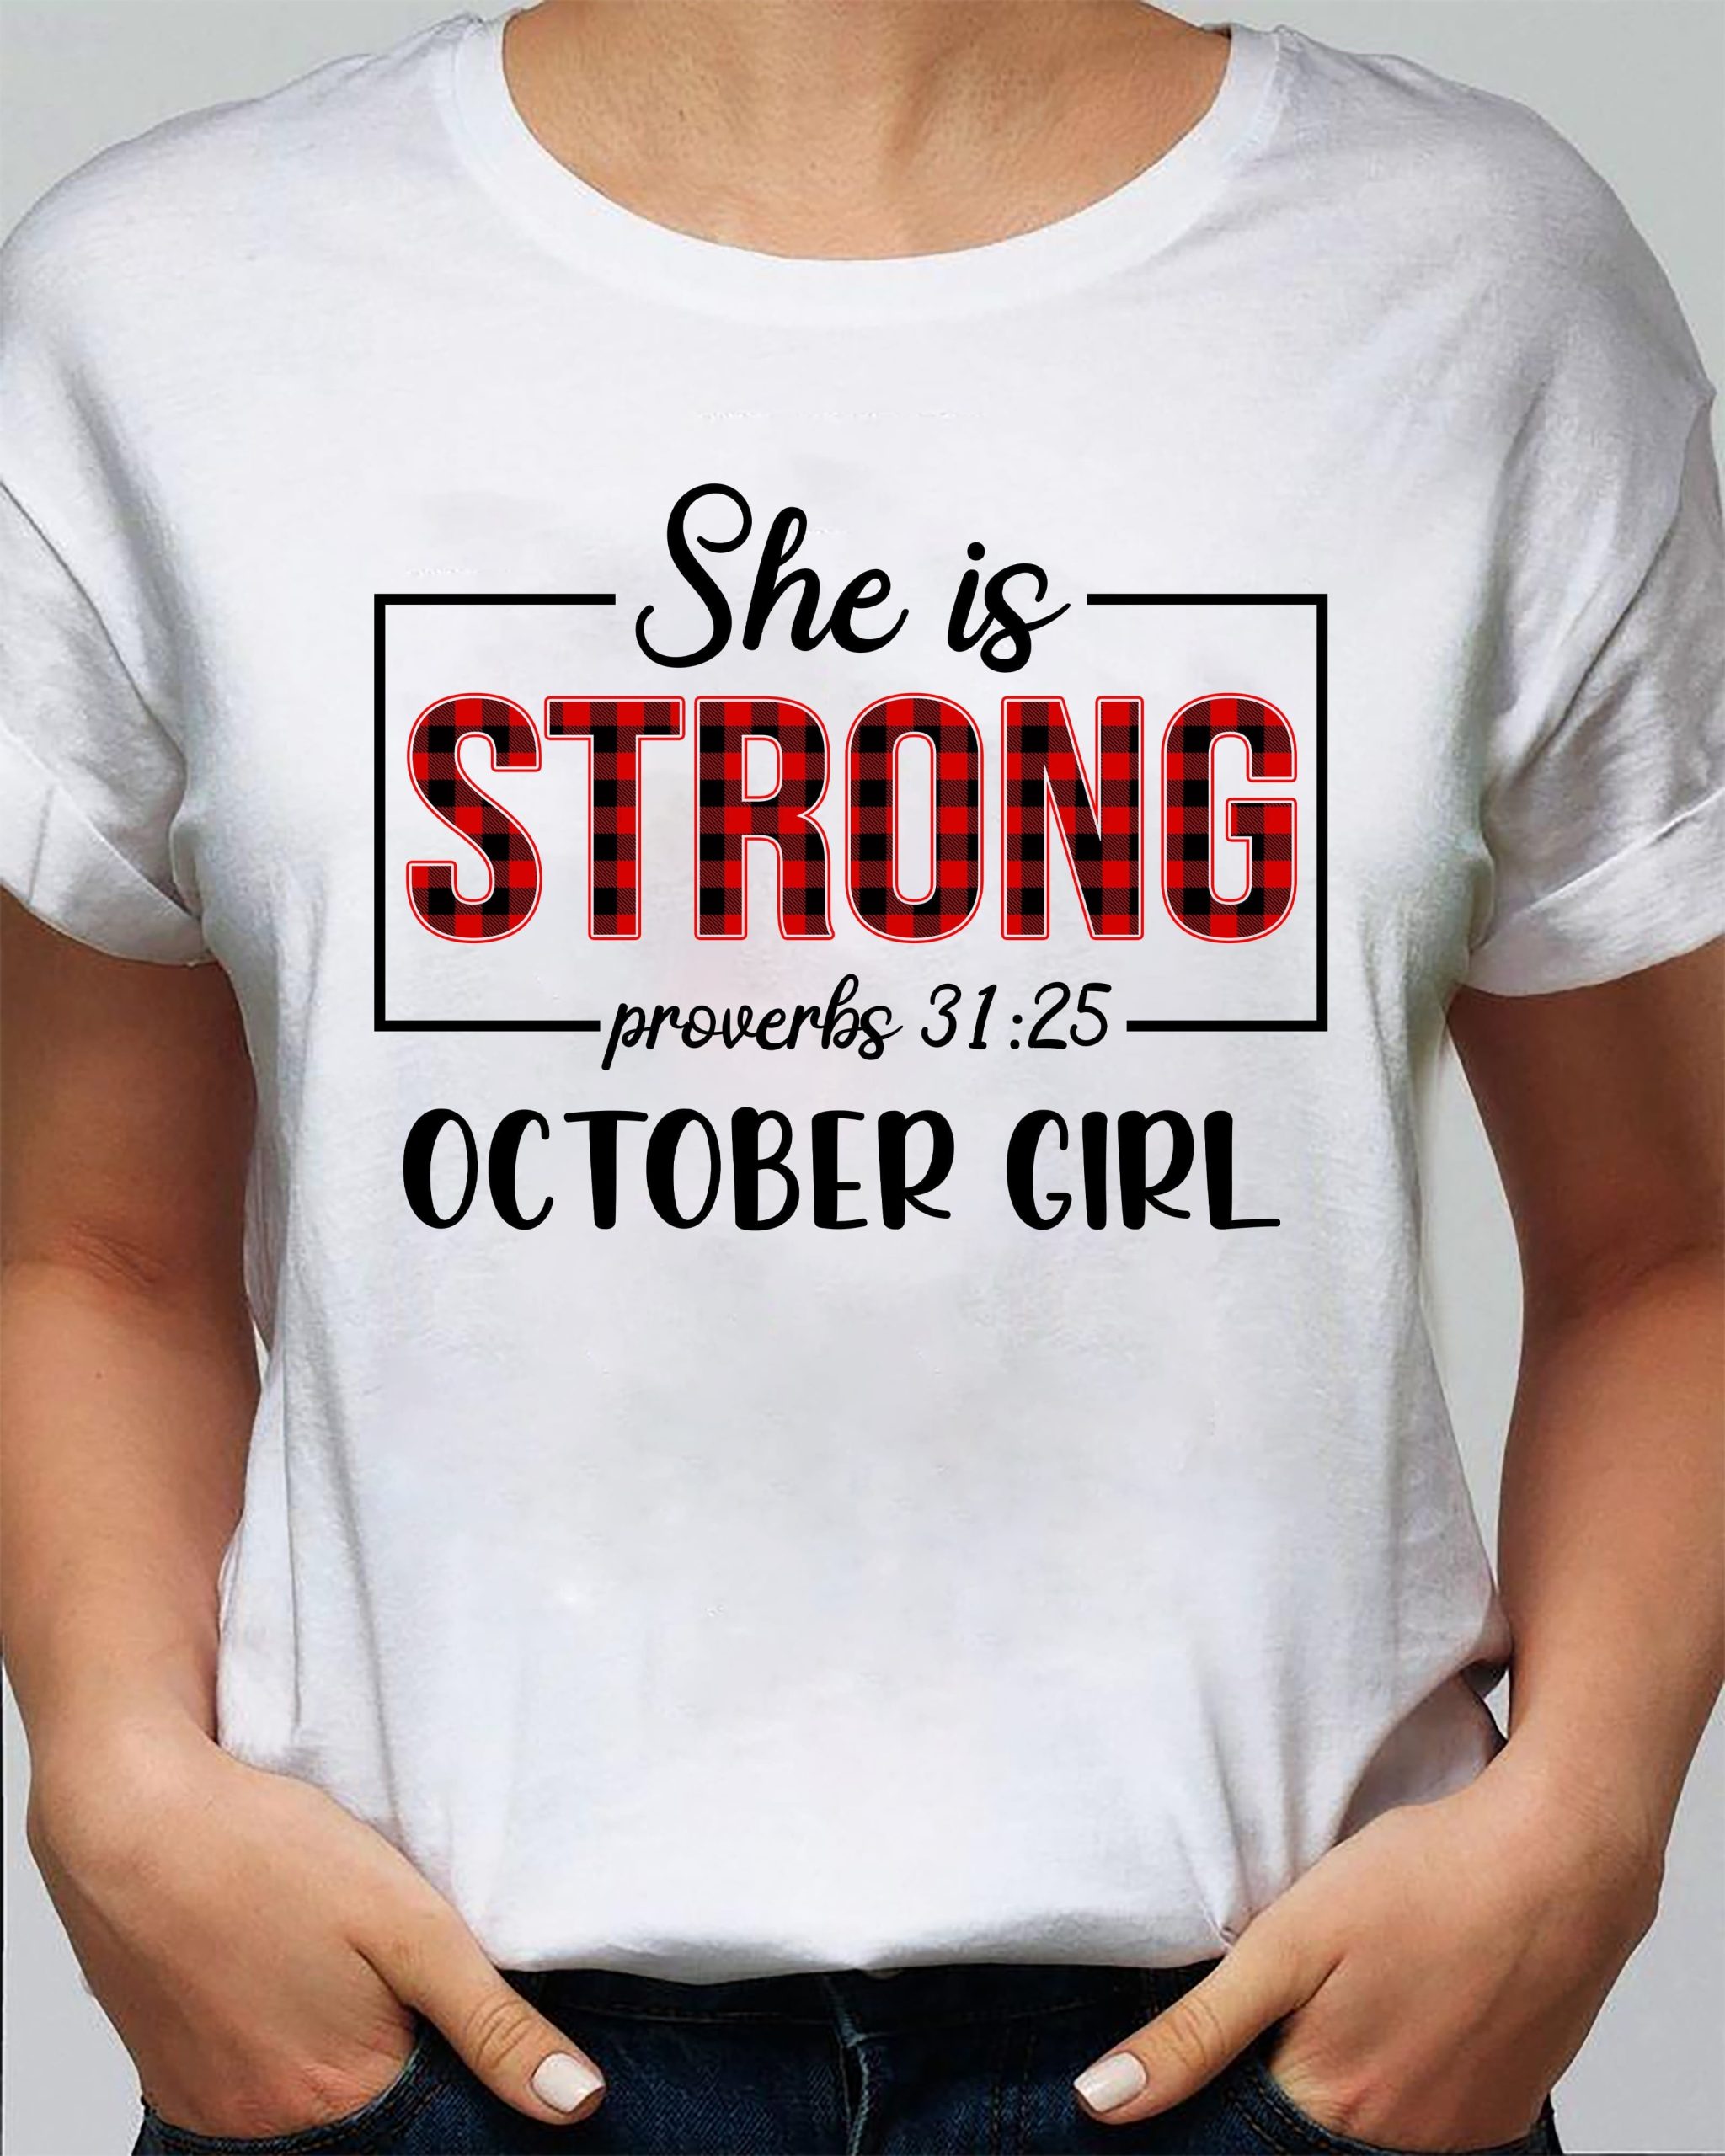 She is strong October girl – Jesus T Shirt